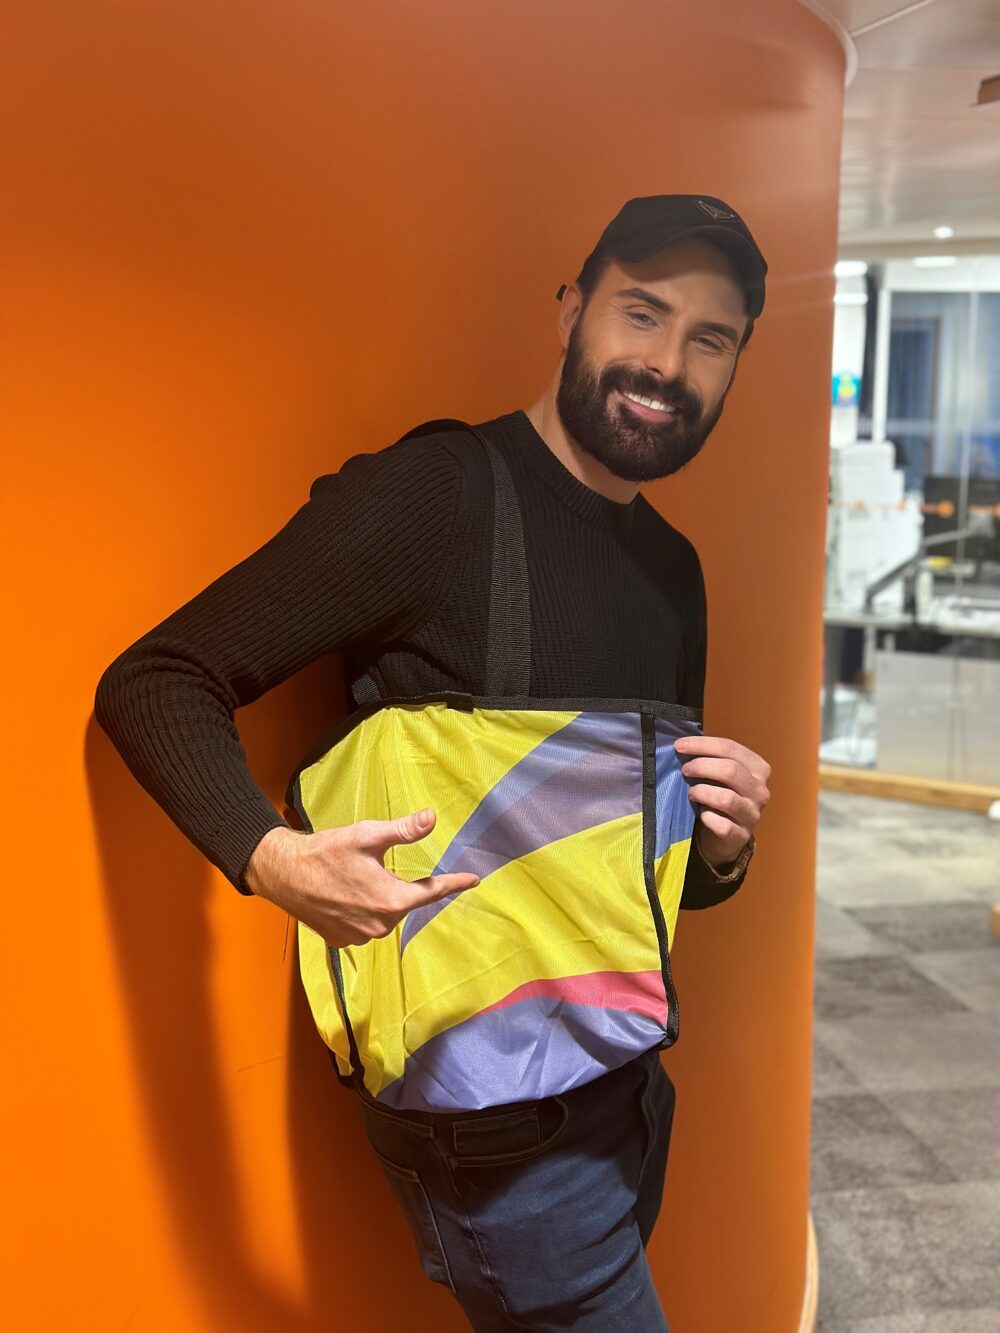 Rylan Clark with one of the Eurovision bags in support of BBC Children in Need. Credit: BBC